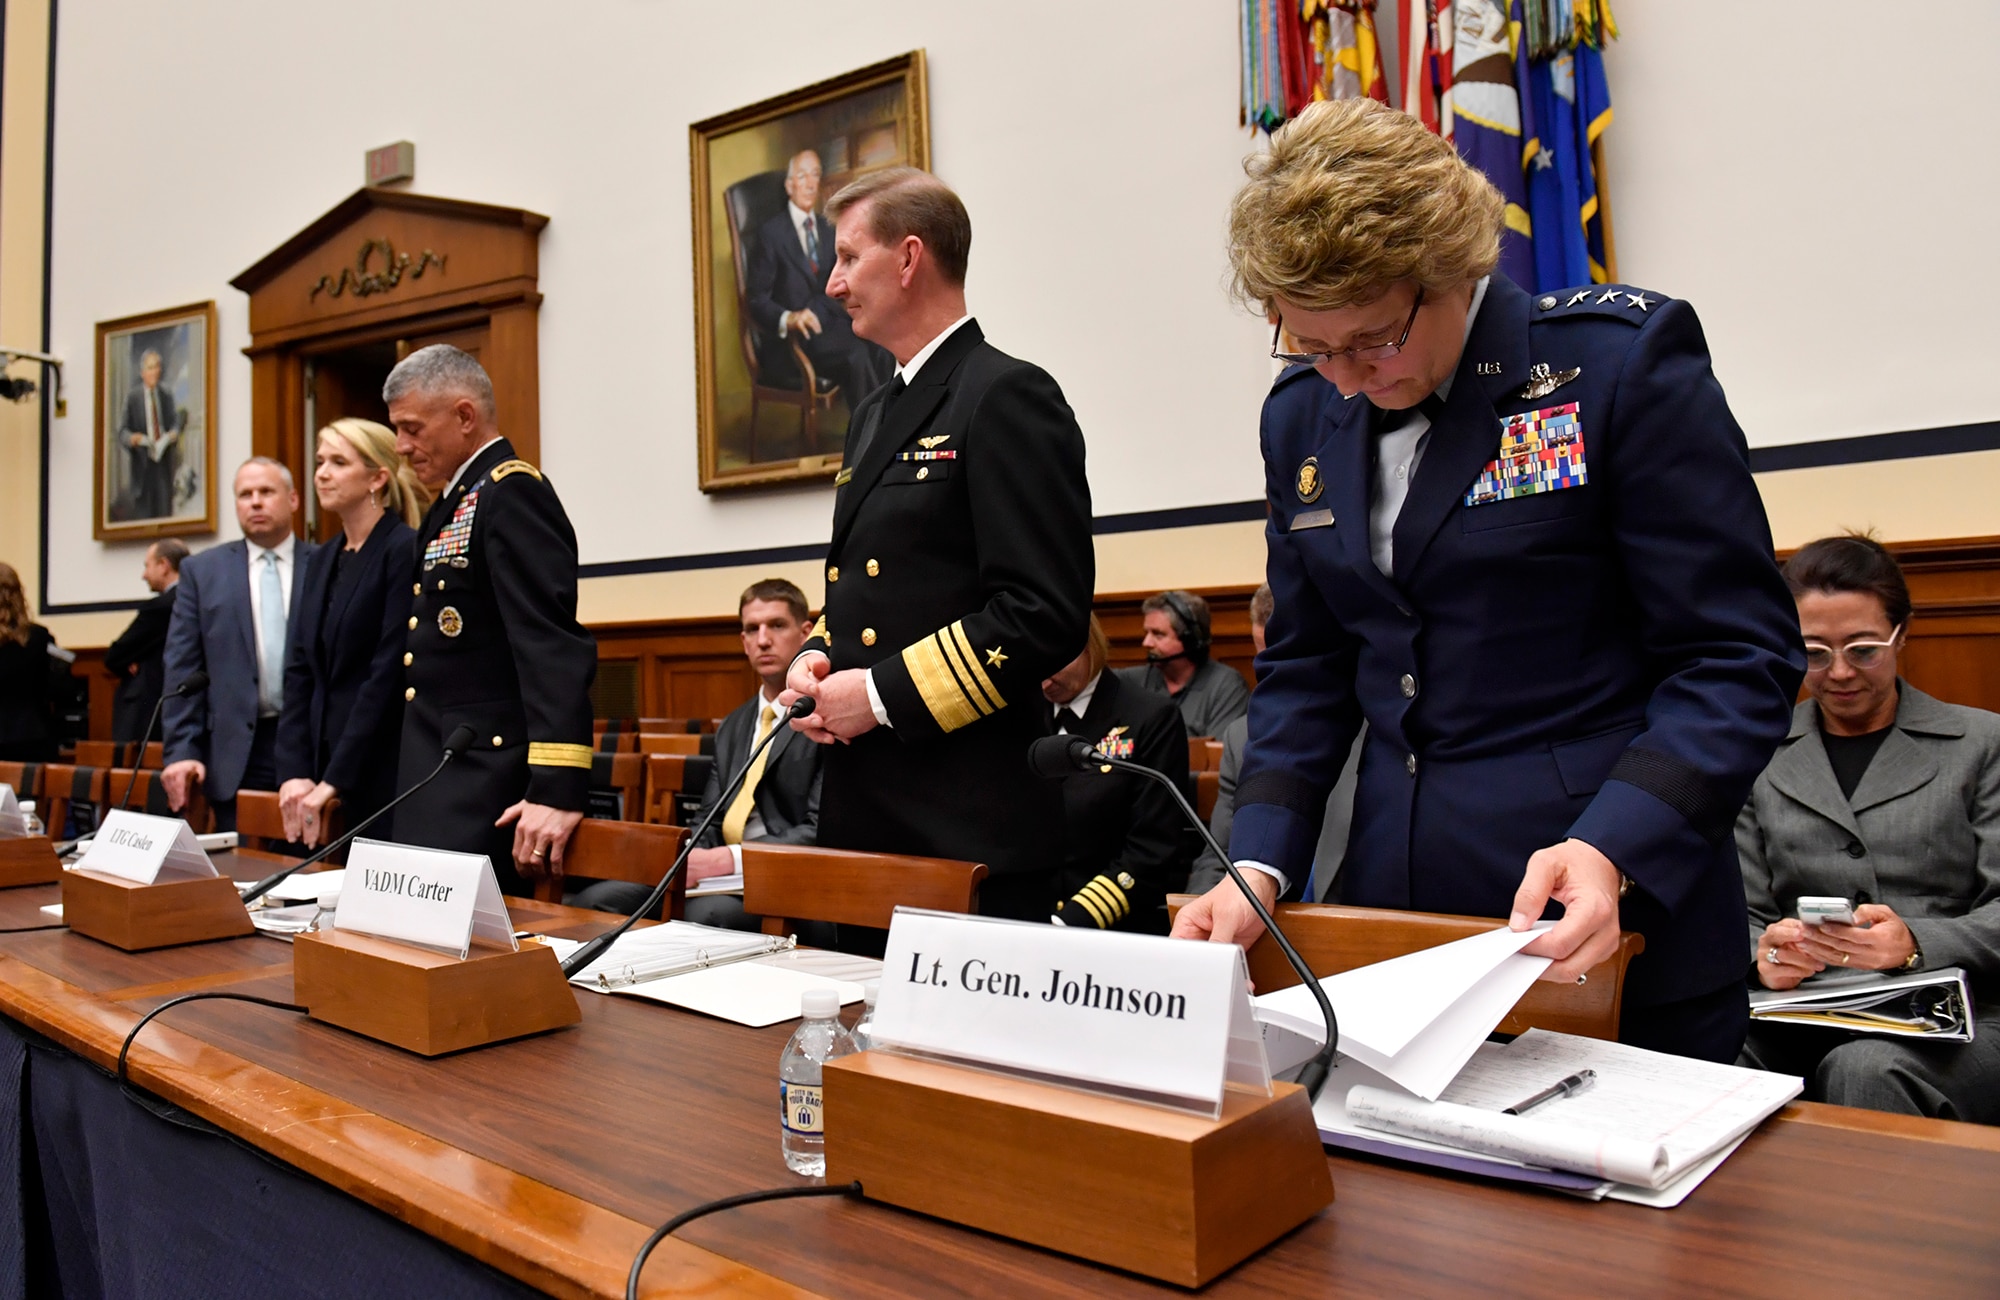 Lt. Gen. Michelle Johnson, the United States Air Force Academy superintendent, reviews her notes before testifying before the House Armed Services Committee on sexual assault within America's service academies May 2, 2017, in Washington, D.C.  Johnson was joined by Vice Adm. Walter E. "Ted" Carter, Jr., the U.S. Naval Academy superintendent, Lt. Gen. Robert L. Caslen, Jr., the U.S. Military Academy superintendent and Dr. Elizabeth Van Winkle, the assistant secretary of defense for readiness. (U.S. Air Force photo/Wayne A. Clark)